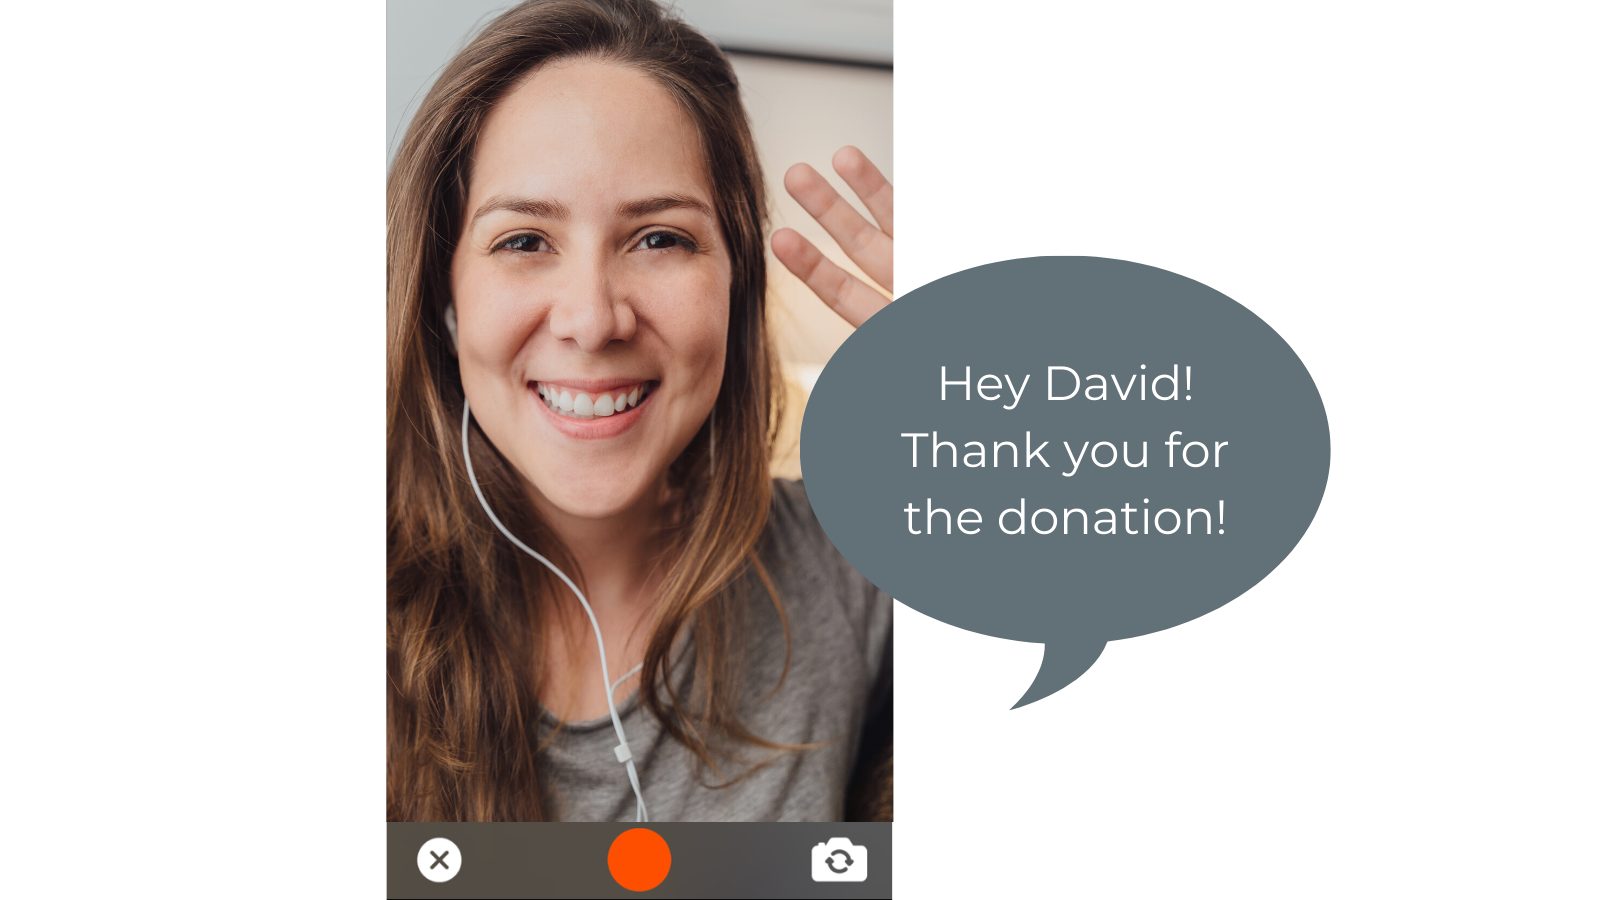 Give Personal Outreach to Donors